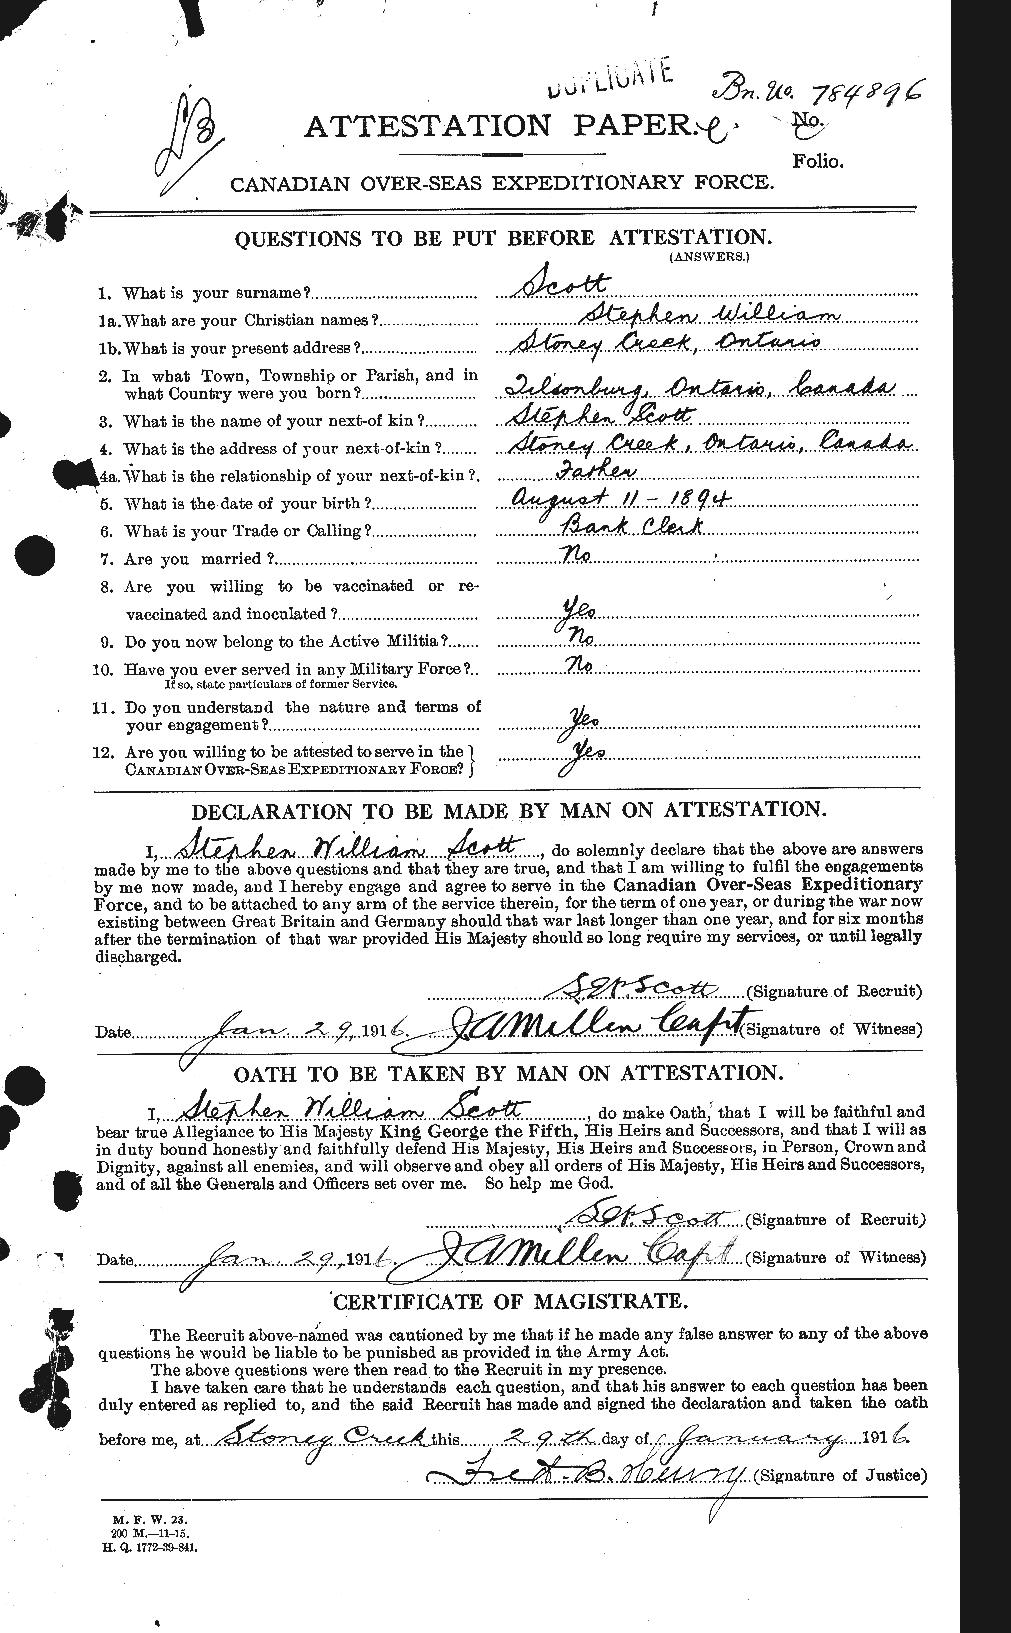 Personnel Records of the First World War - CEF 088834a